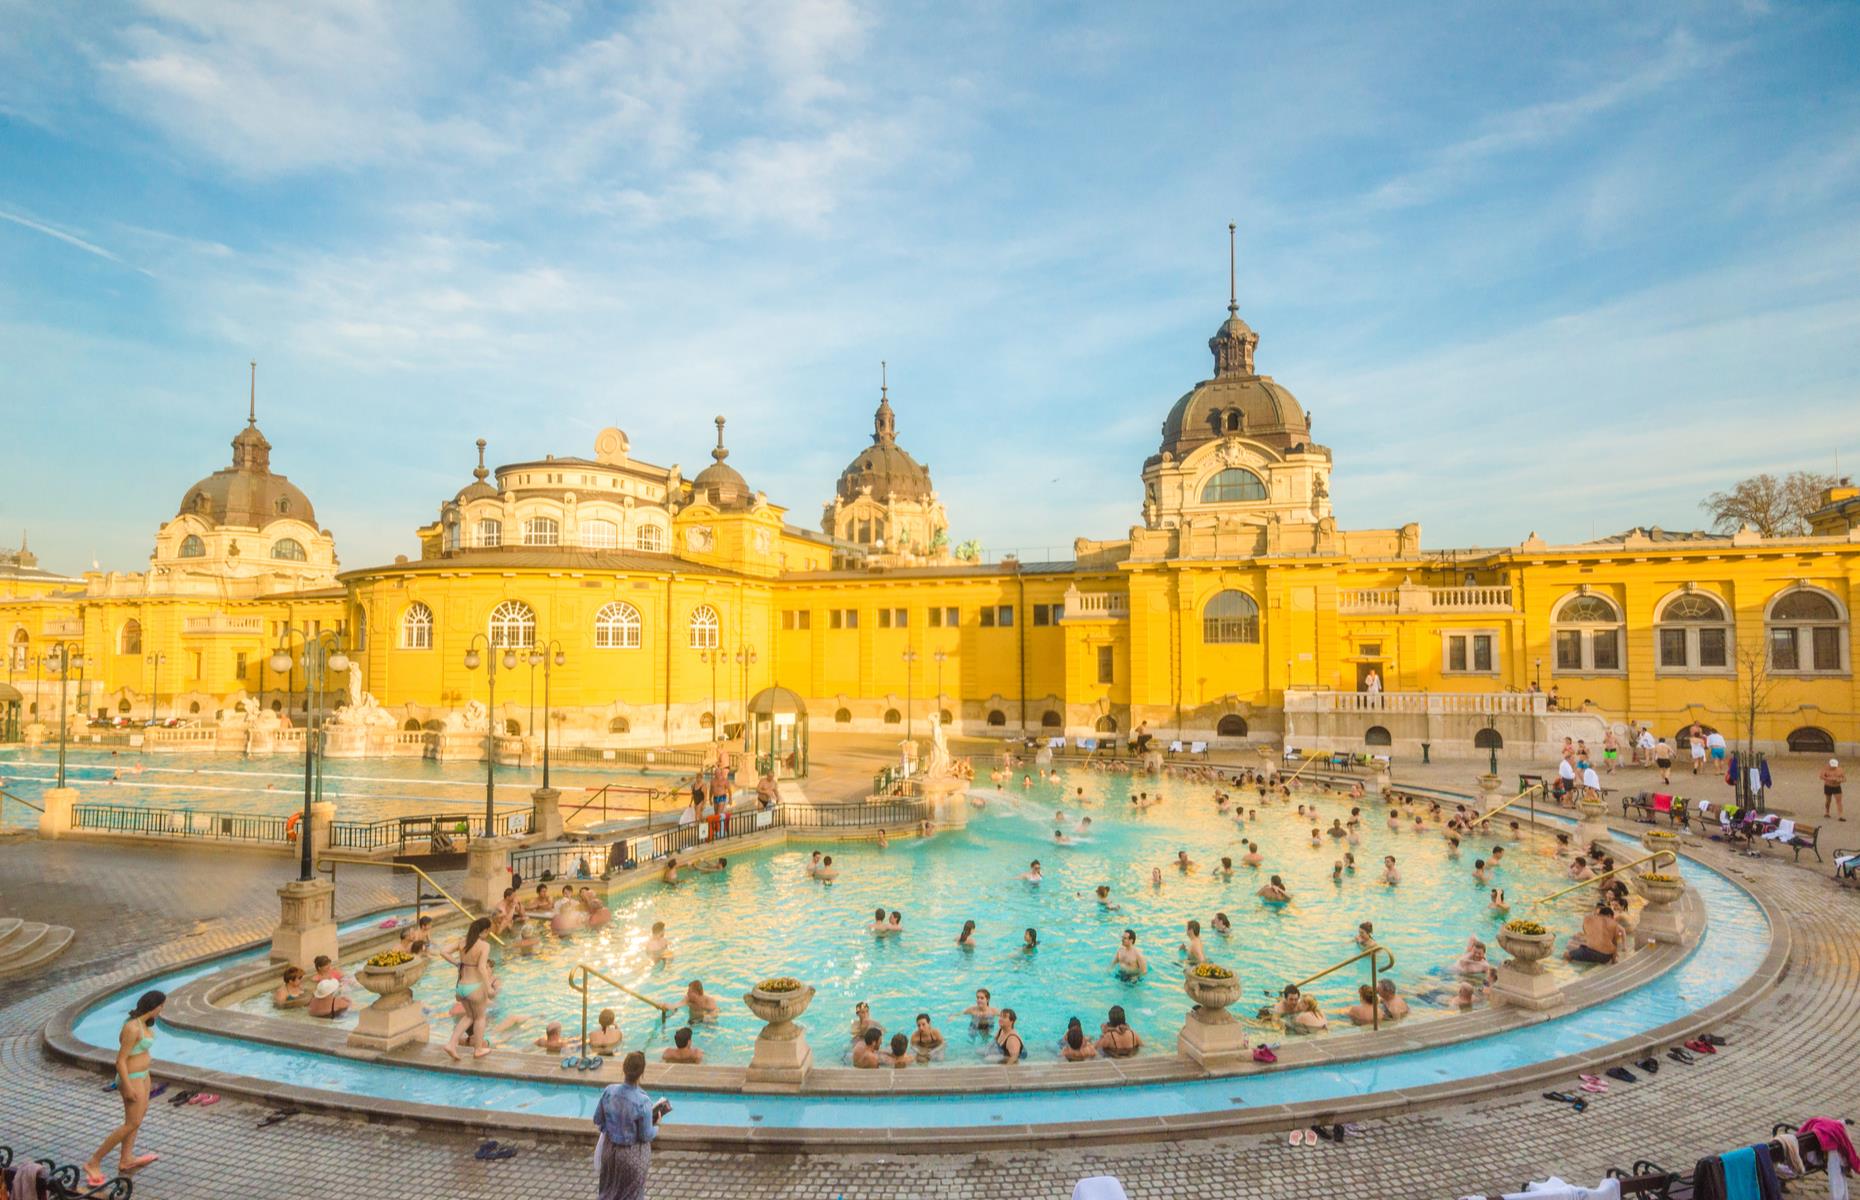 <p>Thermal spas are part of everyday life in Budapest, and a must-do on any visitor’s bucket list. At any time of year you can easily while away an afternoon in the 21 pools at Szechenyi Spa, which has waters ranging from a toasty 104°F to a more bracing 64°F, as well as saunas and massages. For a more hedonistic vibe, head to one of their night parties – or sparties, as they’re known. </p>